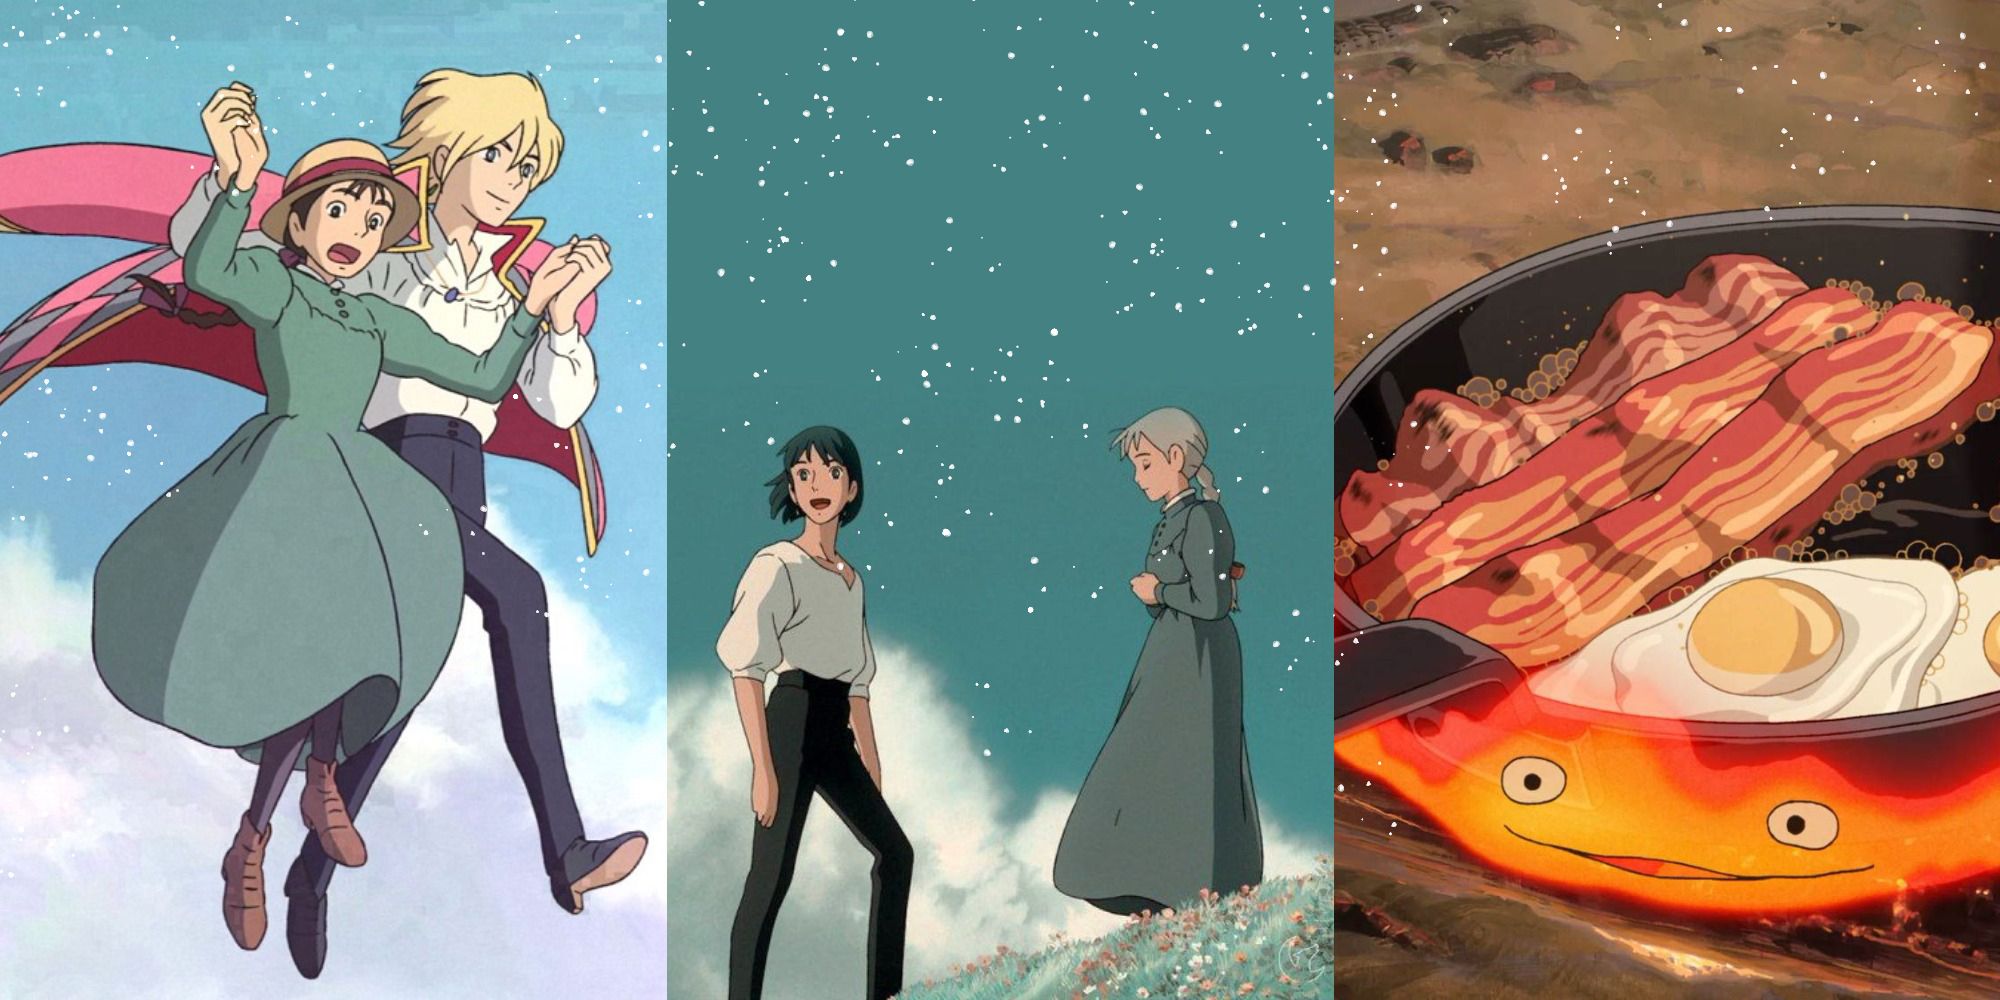 Split image of Howl and Sophie walking in air, with Howl and Sophie on a hill, with Calcifer cooking breakfast in Howl's Moving Castle.